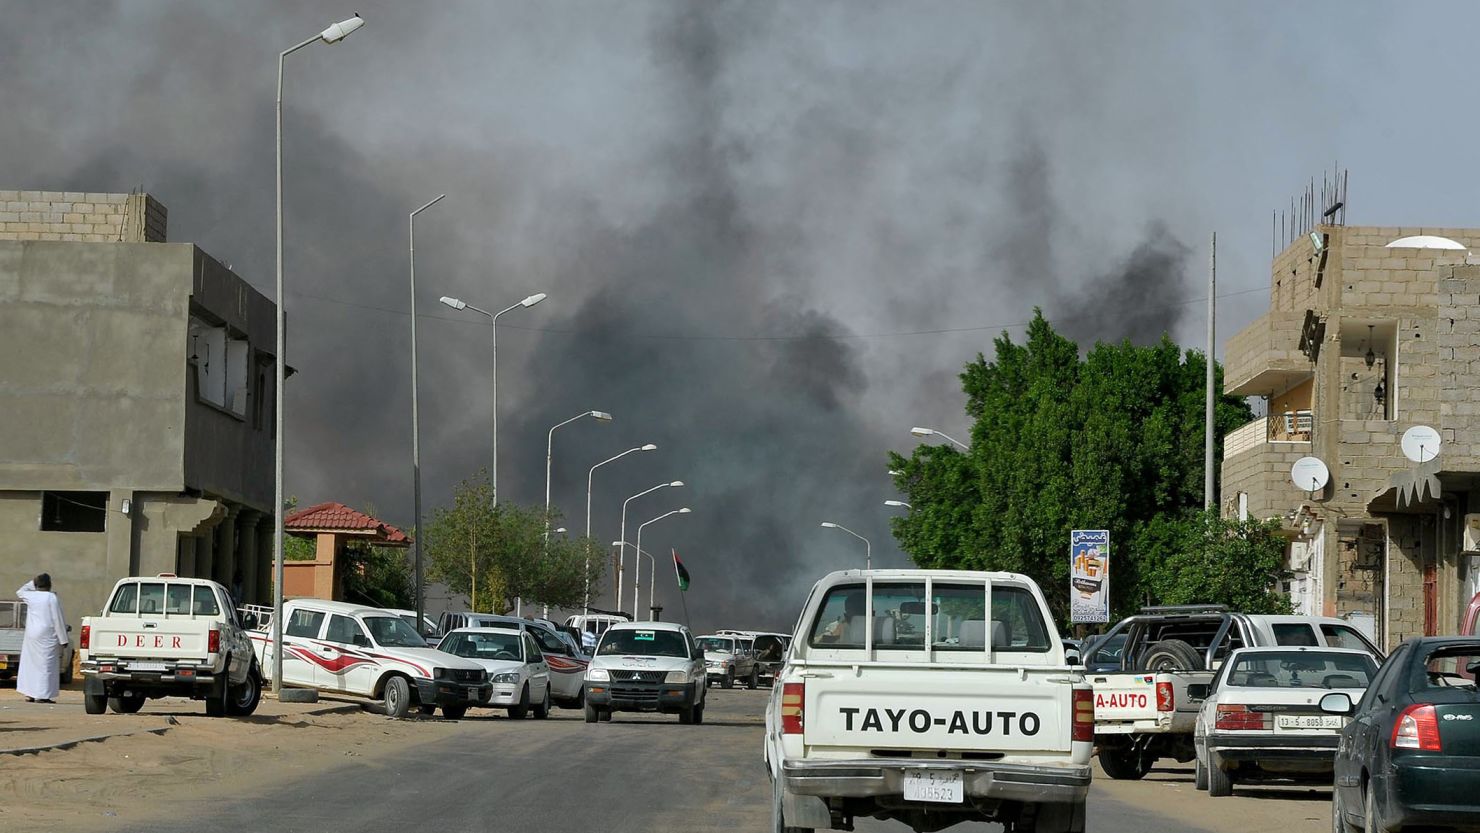 A street in Sabha, Libya, during clashes in 2012 between Toubou and Arab tribesmen.